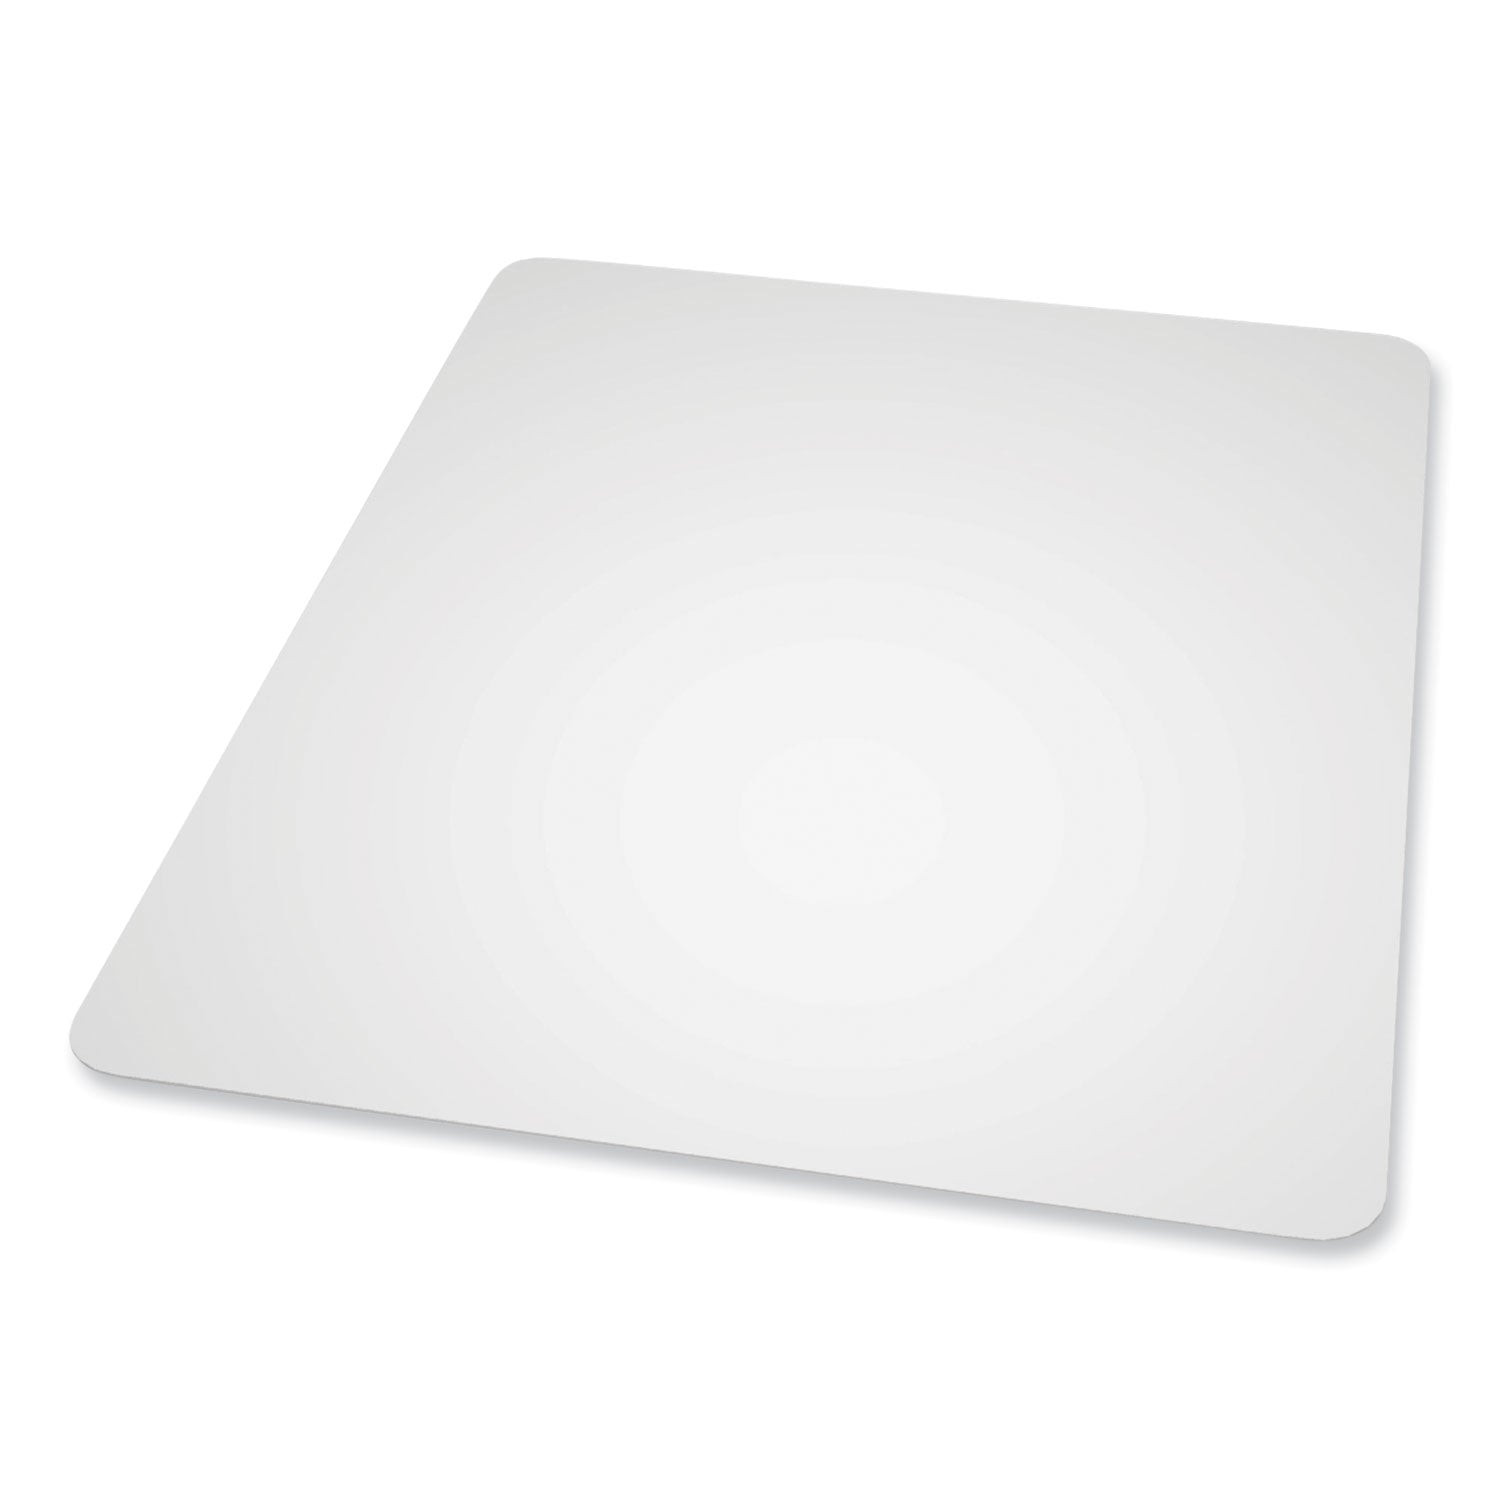 everlife-chair-mat-for-hard-floors-heavy-use-rectangular-48-x-72-clear-ships-in-4-6-business-days_esr132431 - 1